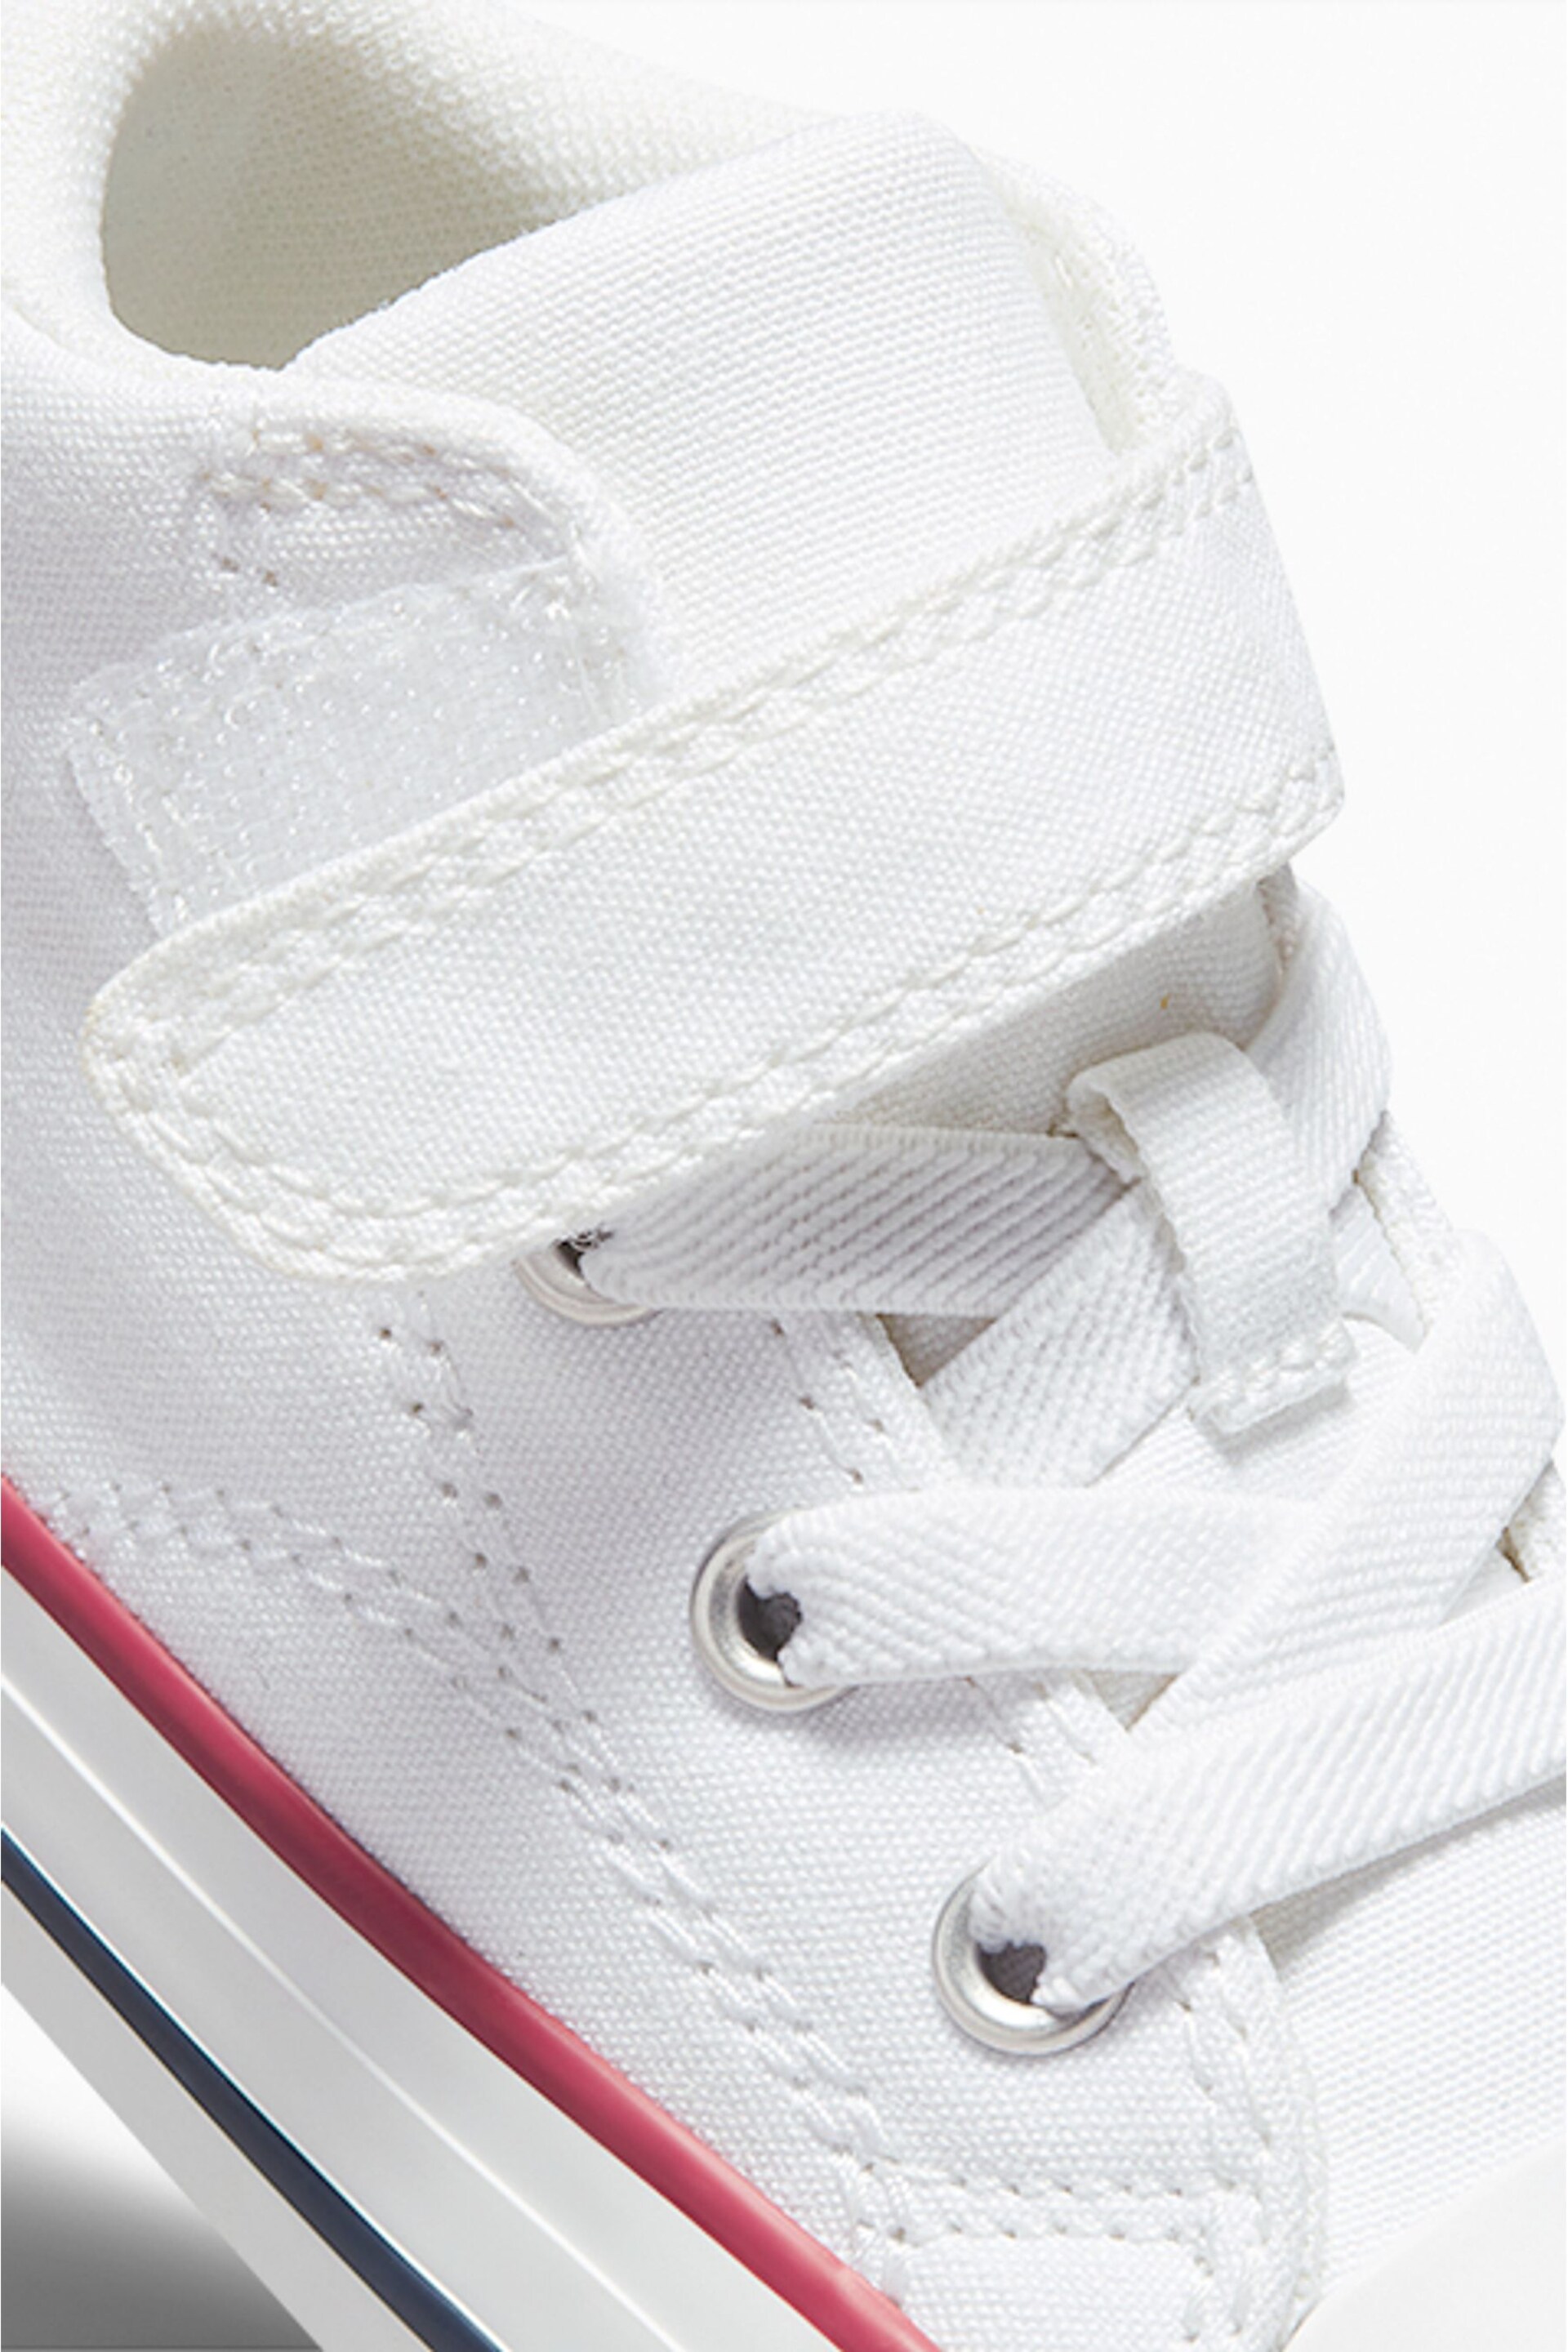 Converse White Malden Street Infant Trainers - Image 8 of 8